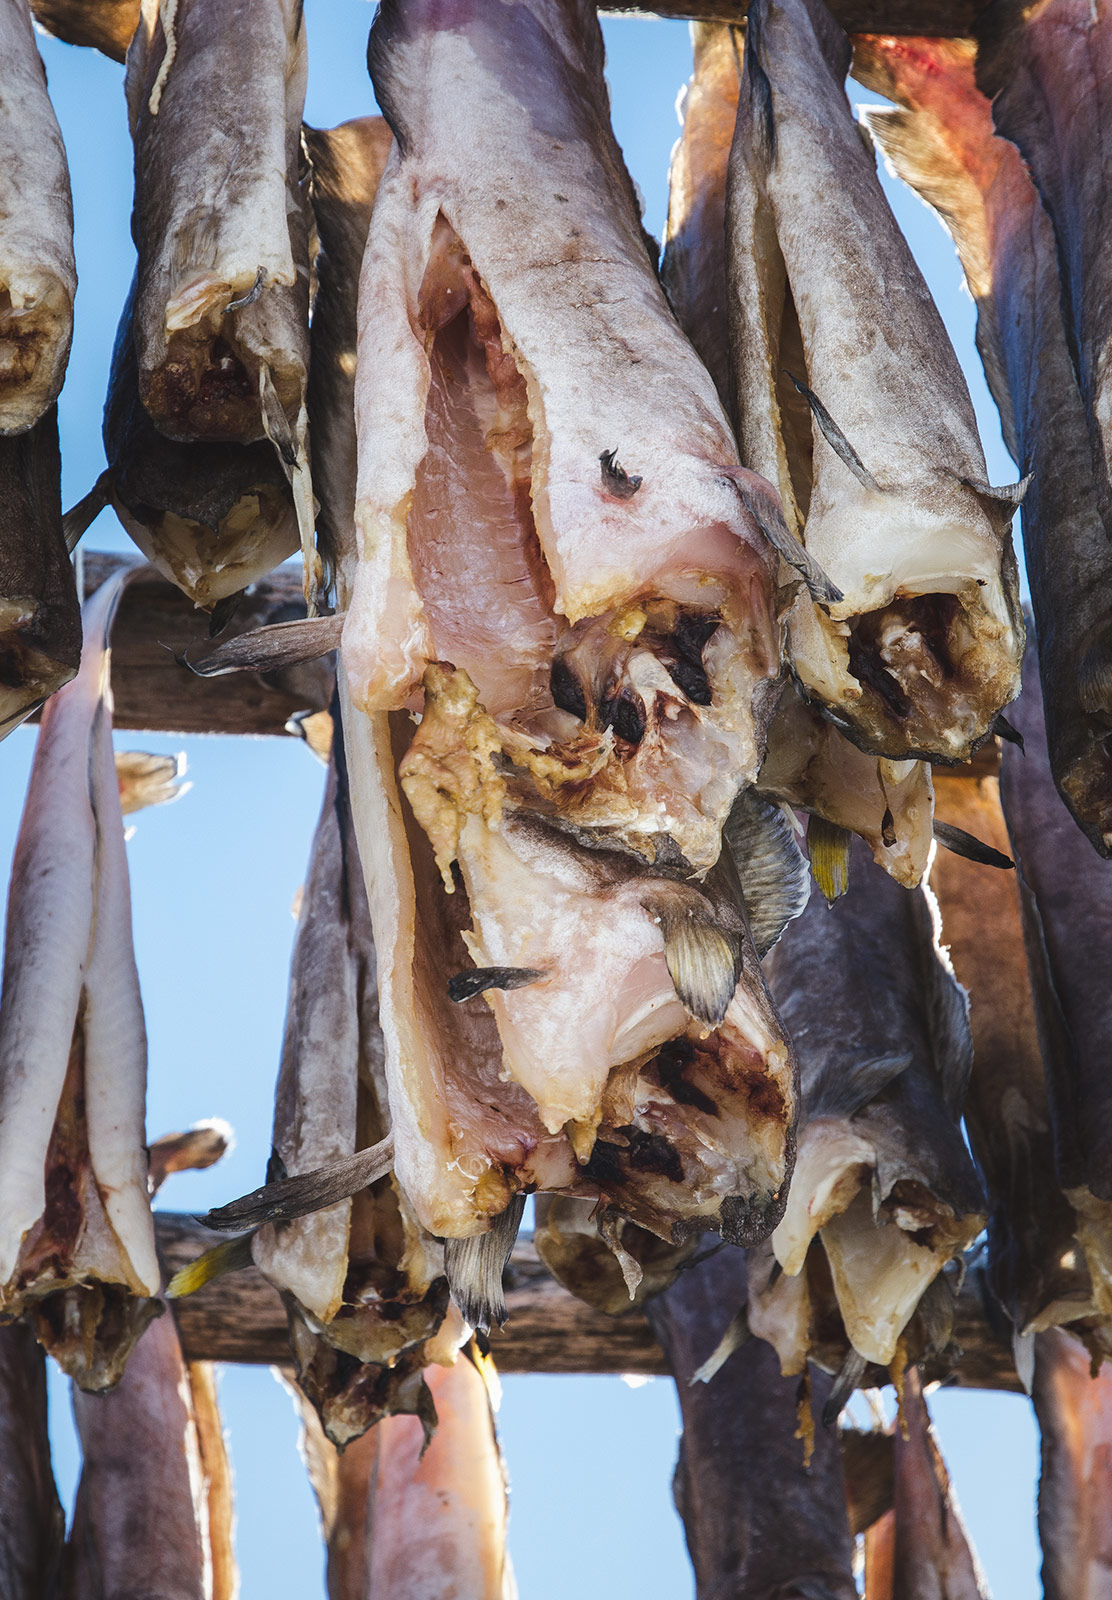 Drying cod meat